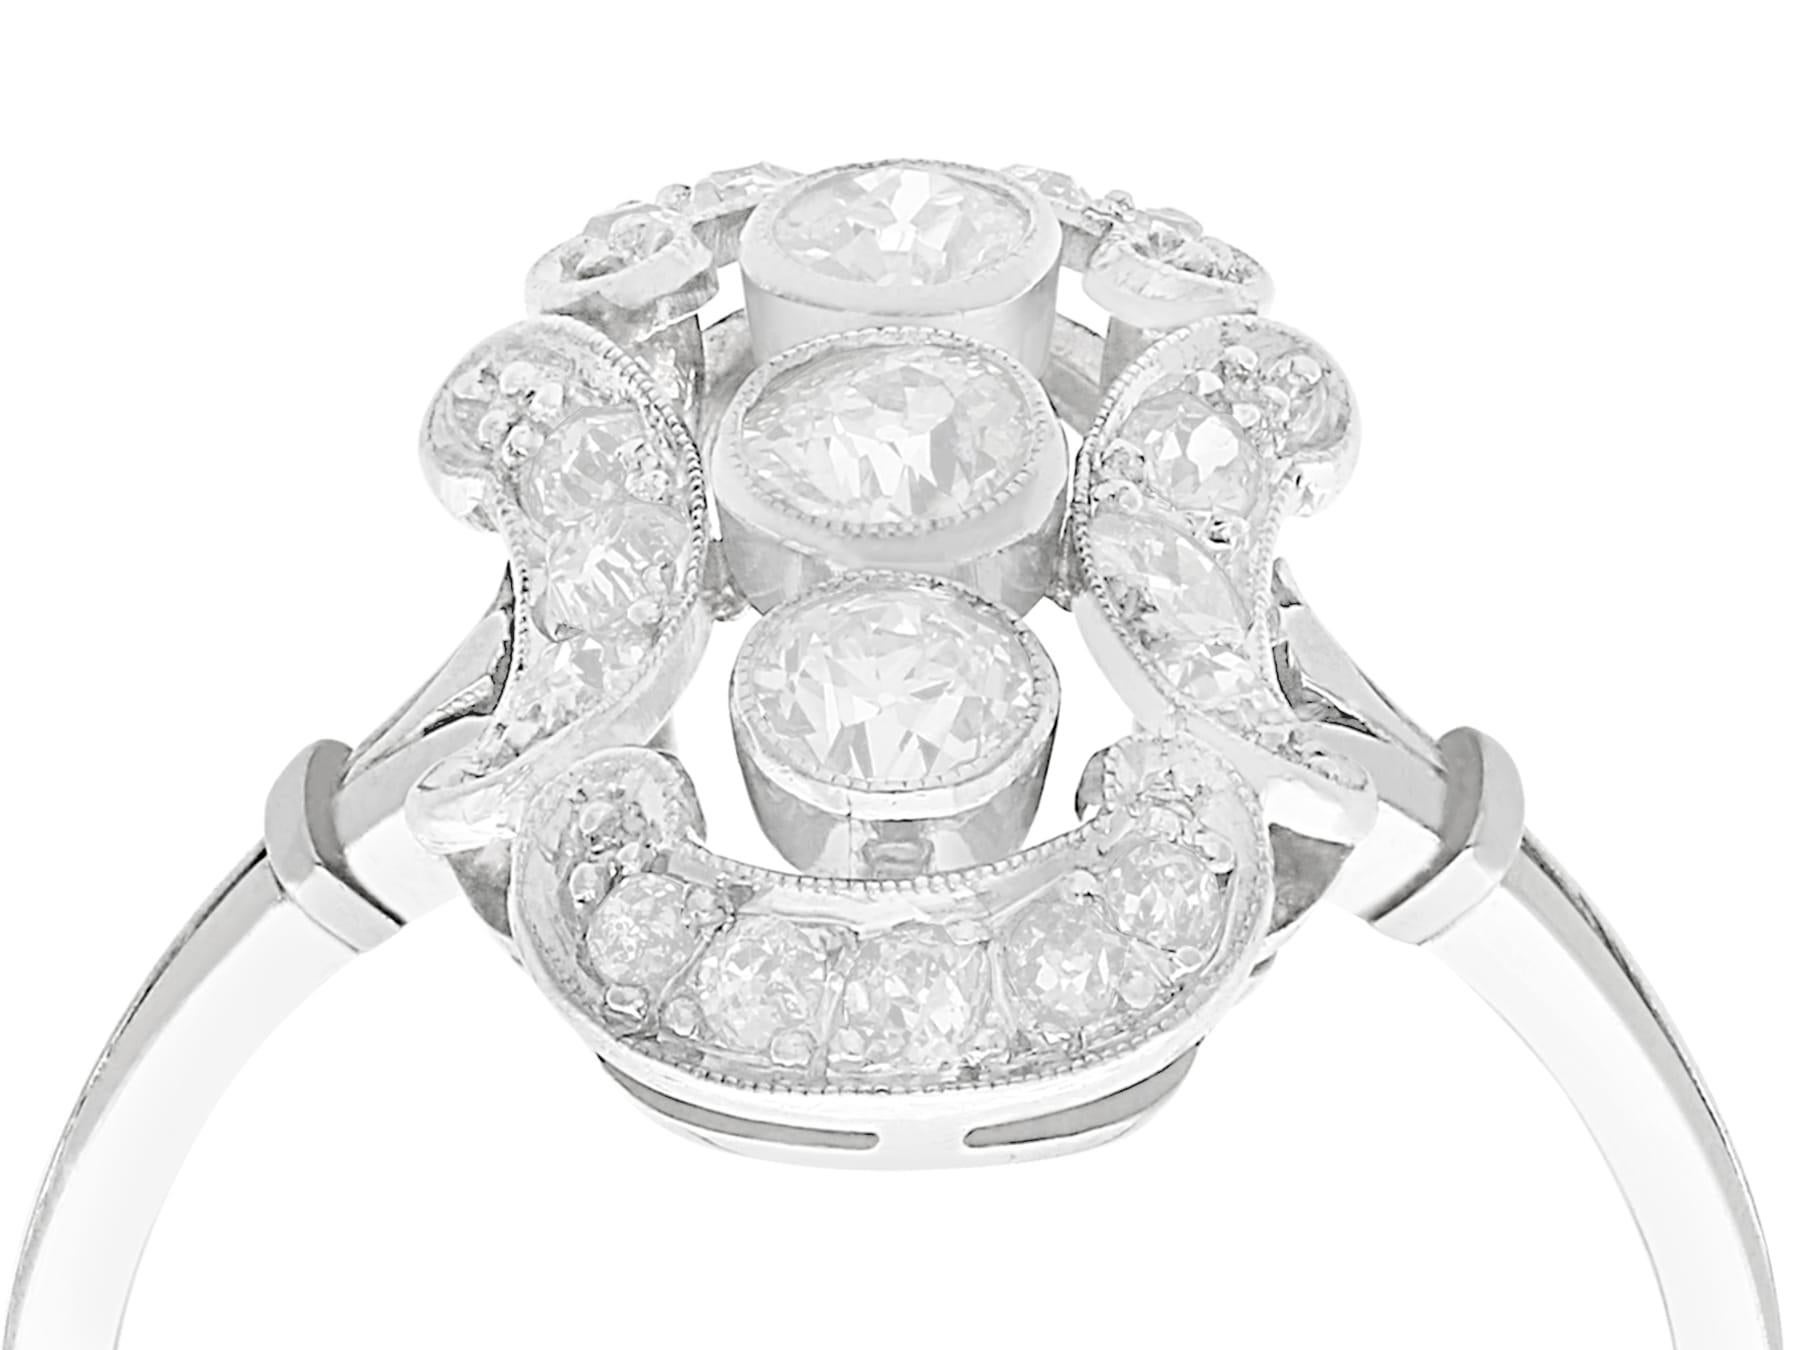 A stunning antique European 0.80 carat diamond and 14 karat white gold dress ring; part of our diverse antique jewelry and estate jewelry collections.

This stunning, fine and impressive 1920s diamond cocktail ring has been crafted in 14k white